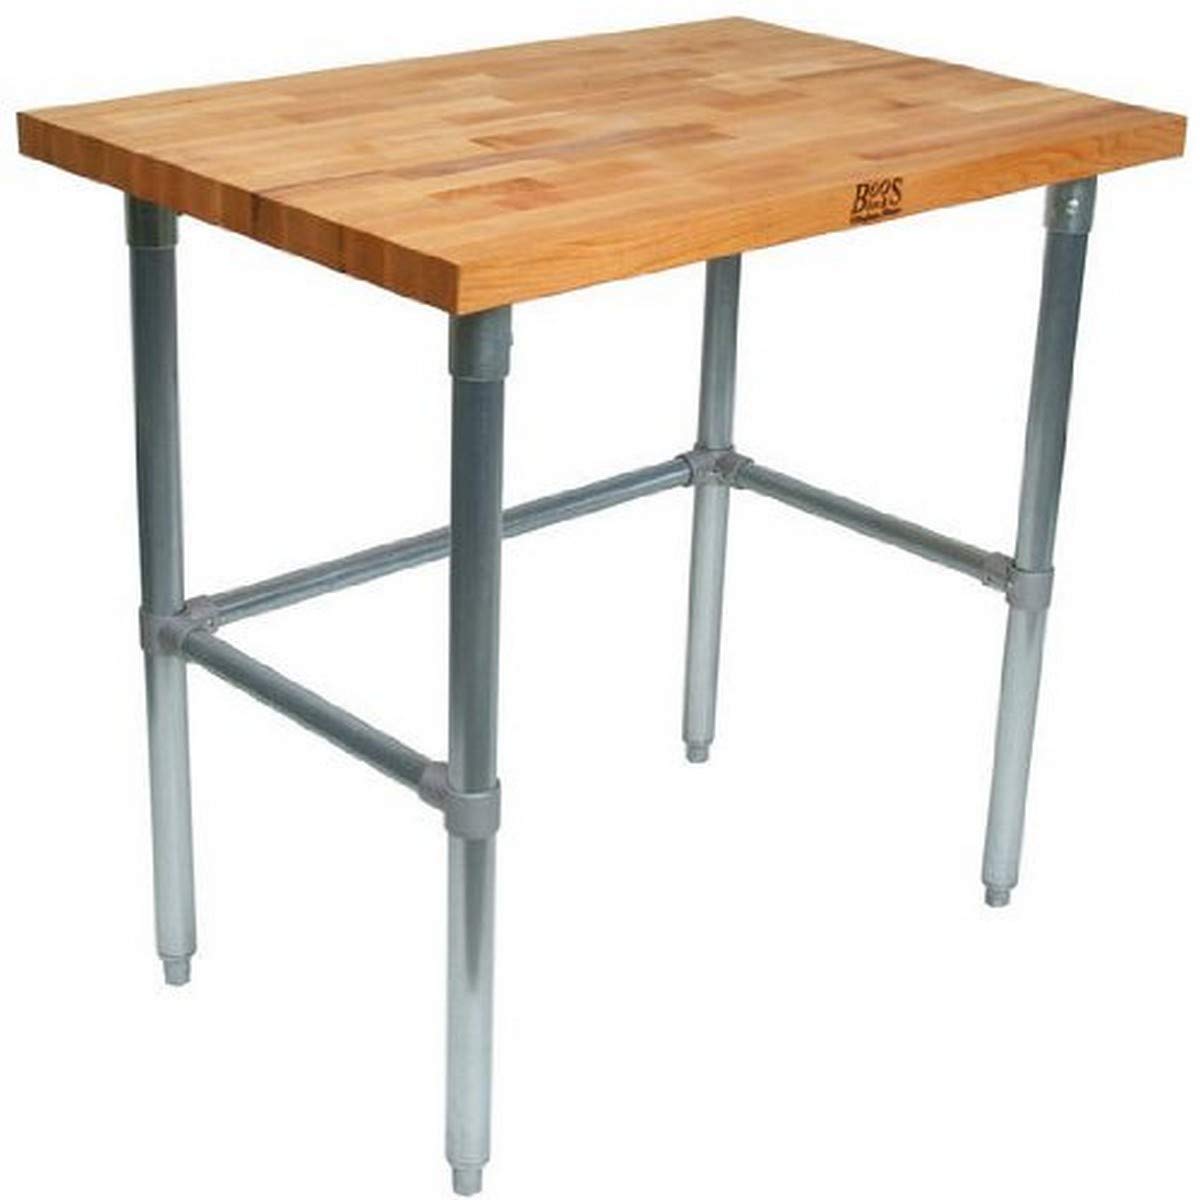 John Boos HNB18 Maple Top Work Table with Galvanized Steel Base and Bracing, 120" Long x 36" Wide 1-3/4" Thick